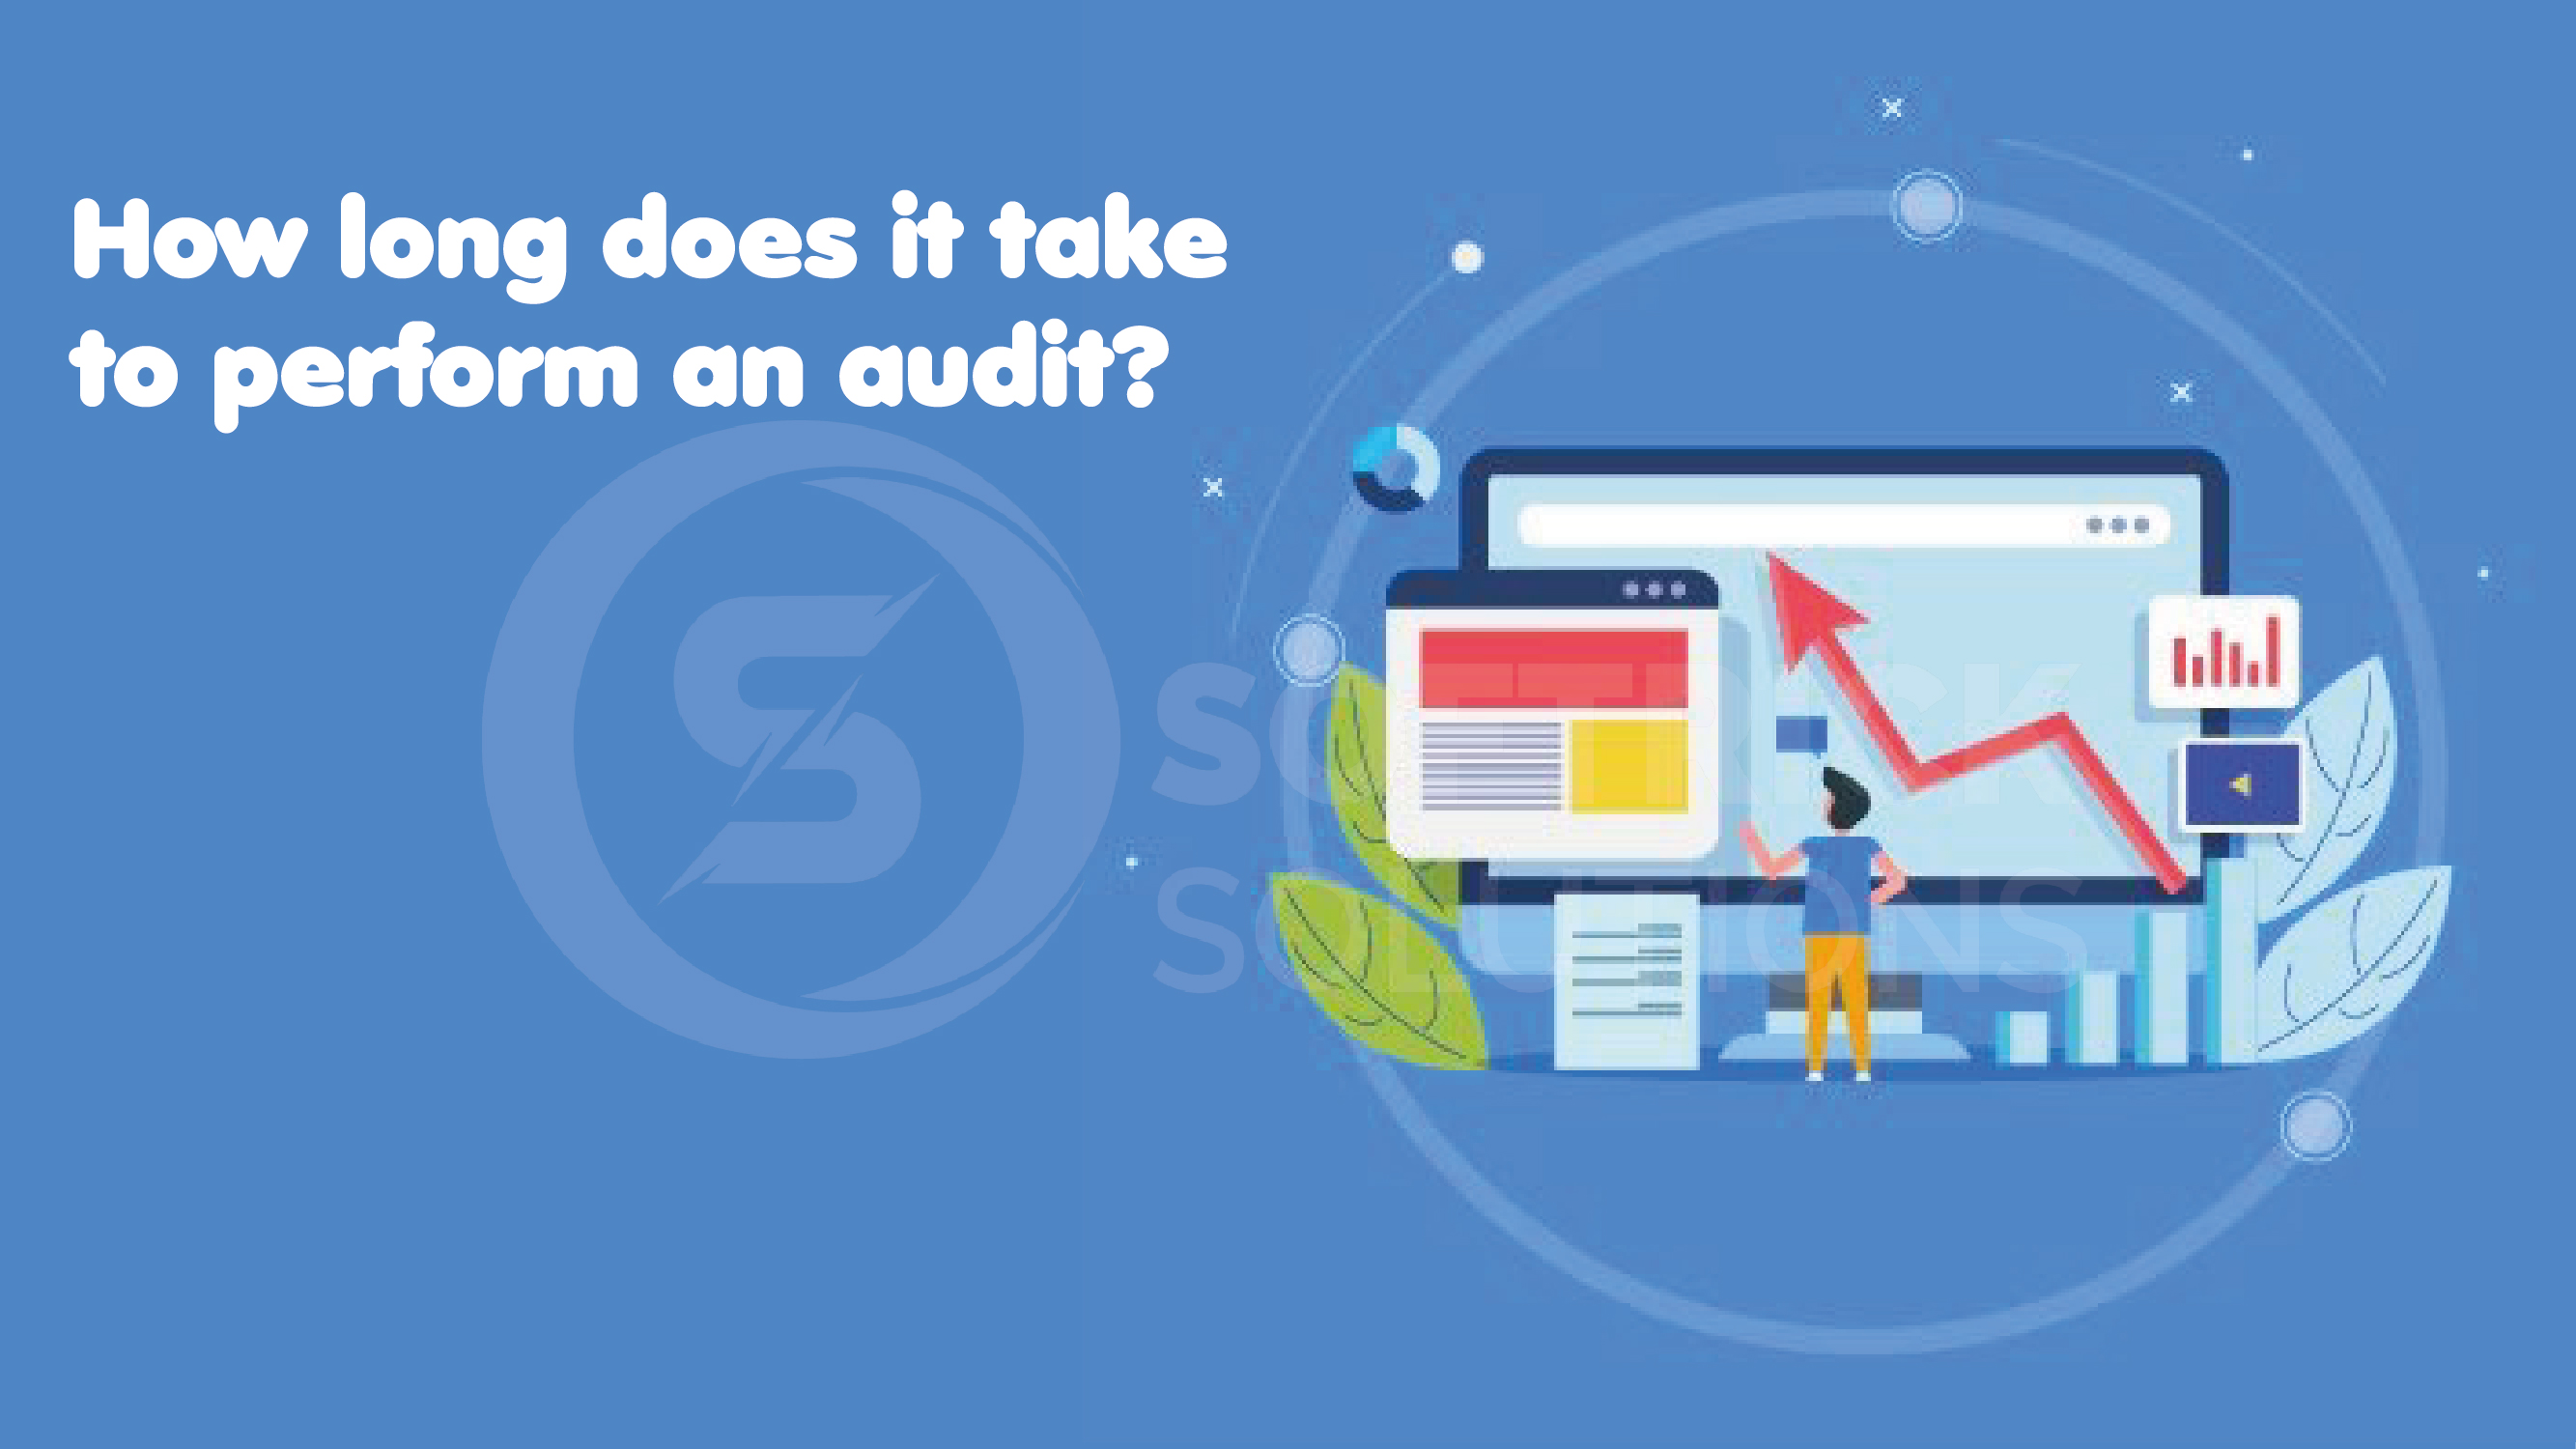 How long does it take to perform an audit